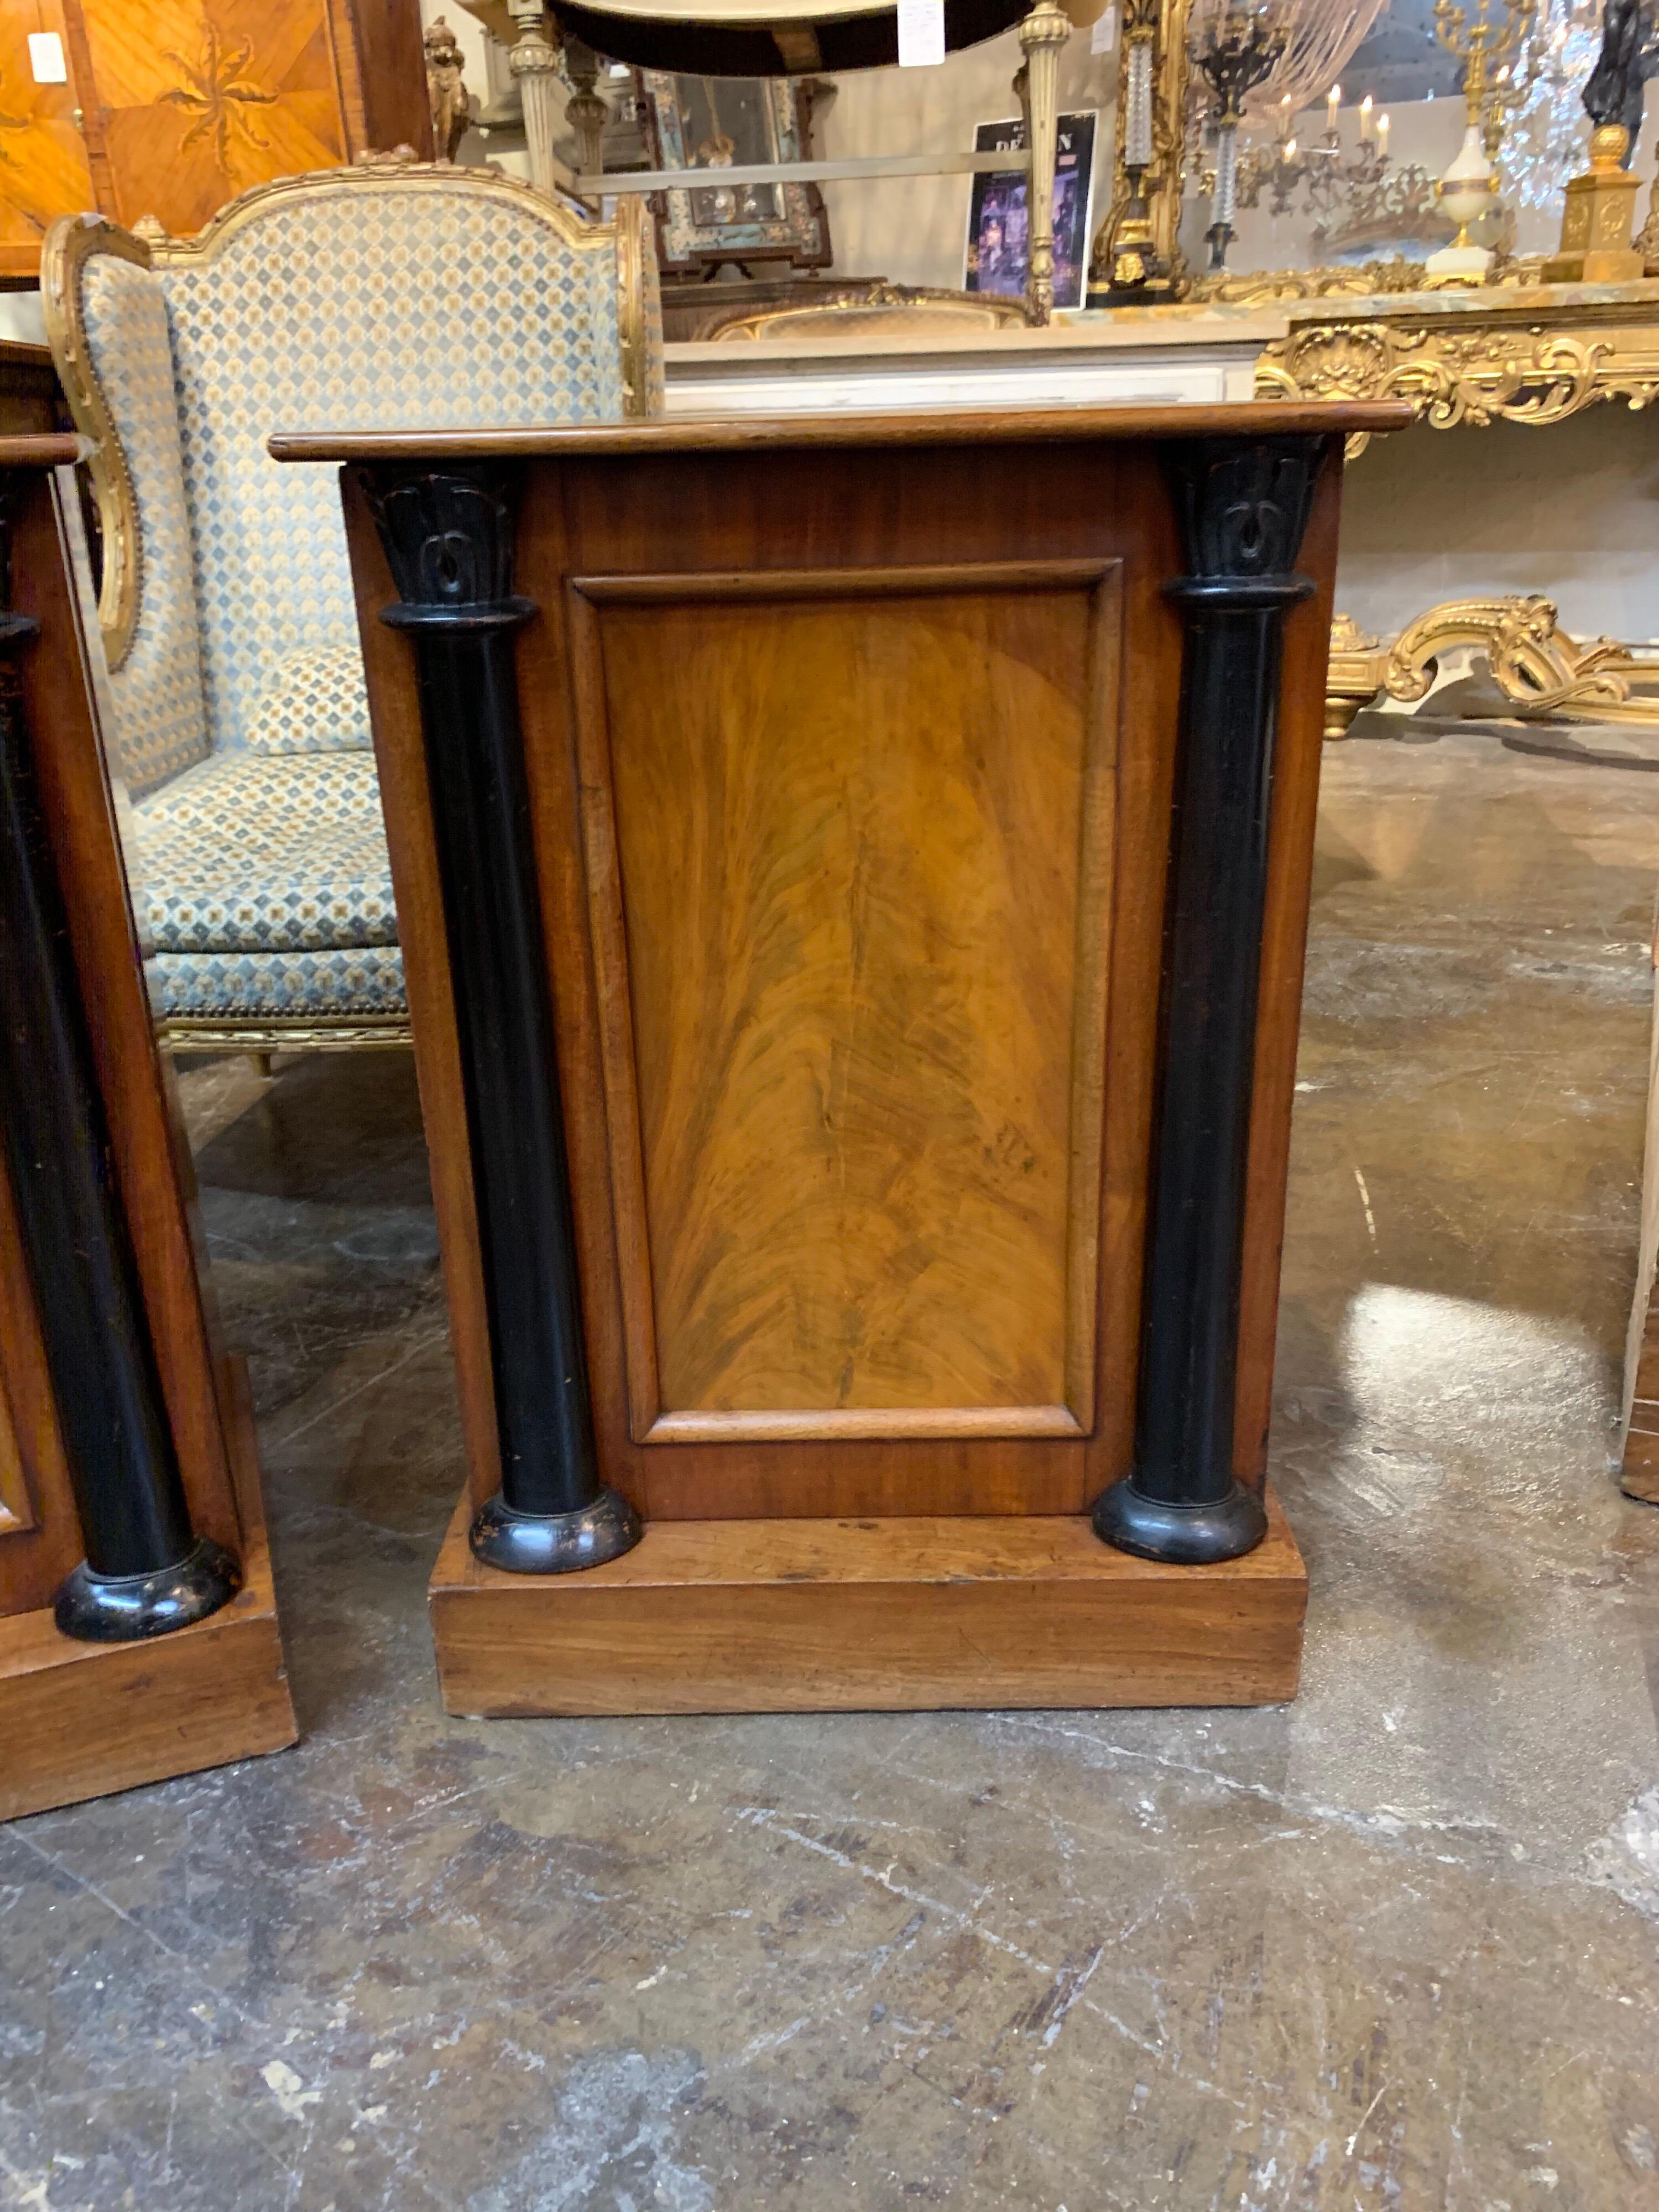 Handsome pair of Continental Empire style walnut and ebonized side tables. These tables have a very fine finish and nice storage as well. Quite elegant for a fine home!